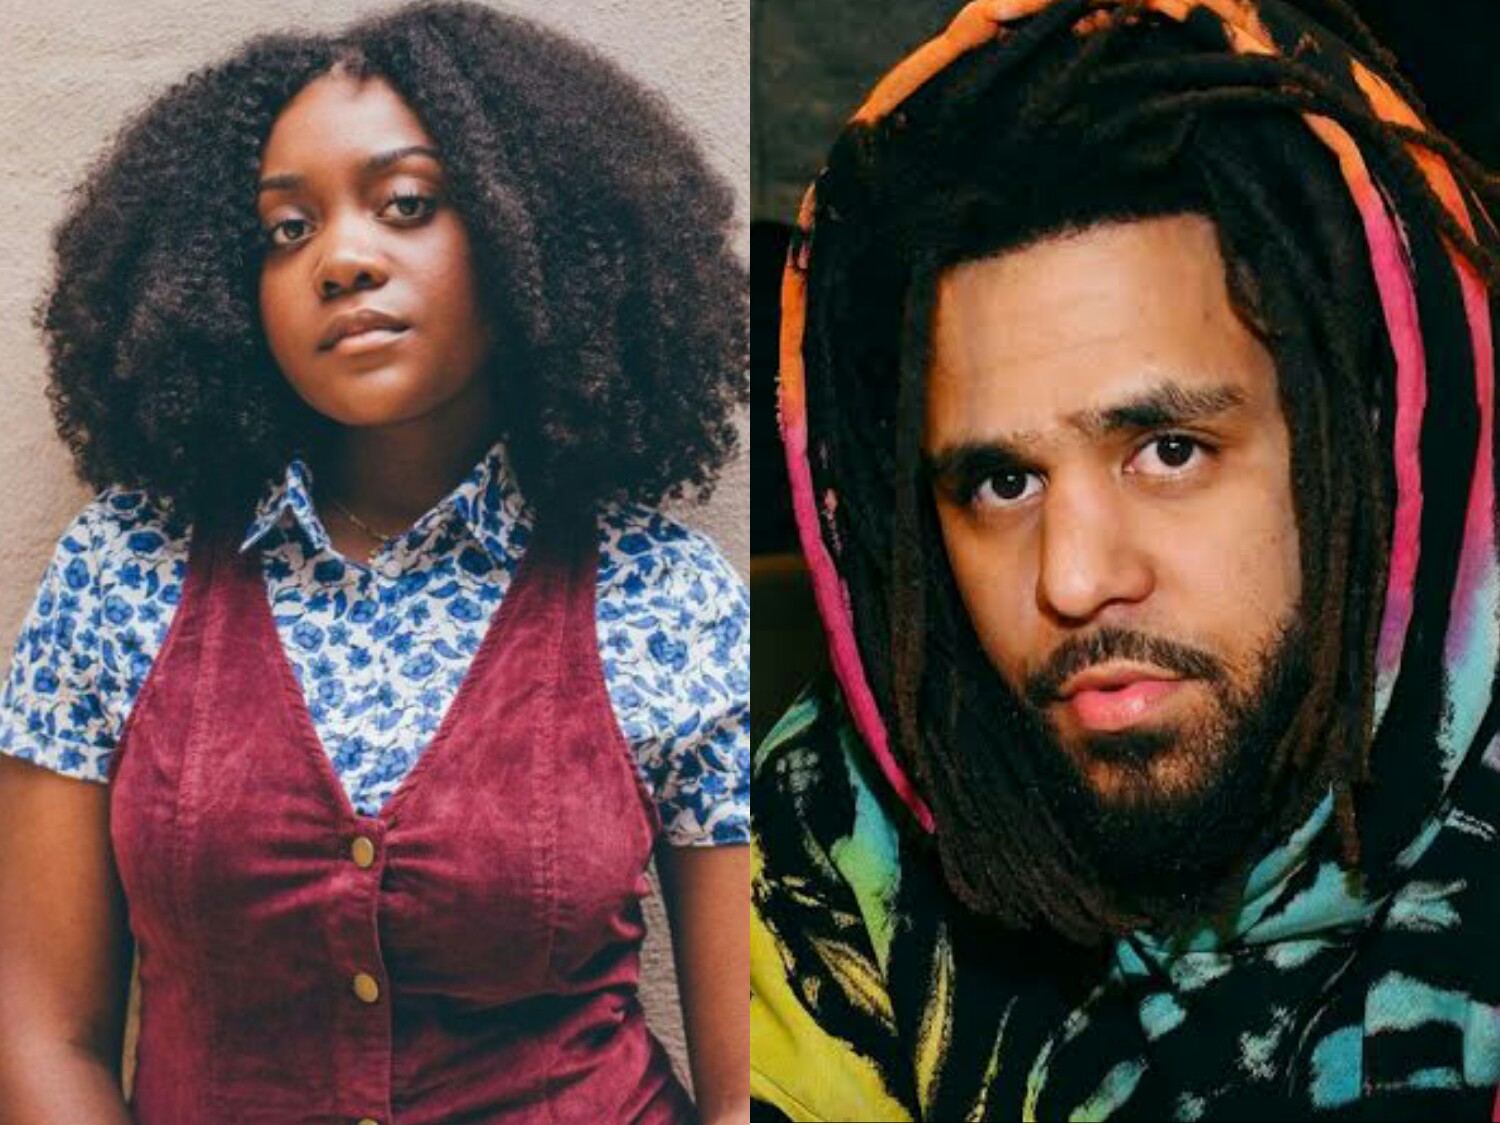 Noname Appears to Respond to J. Cole's "Snow On Tha Bluff" in New ‘Song 33’